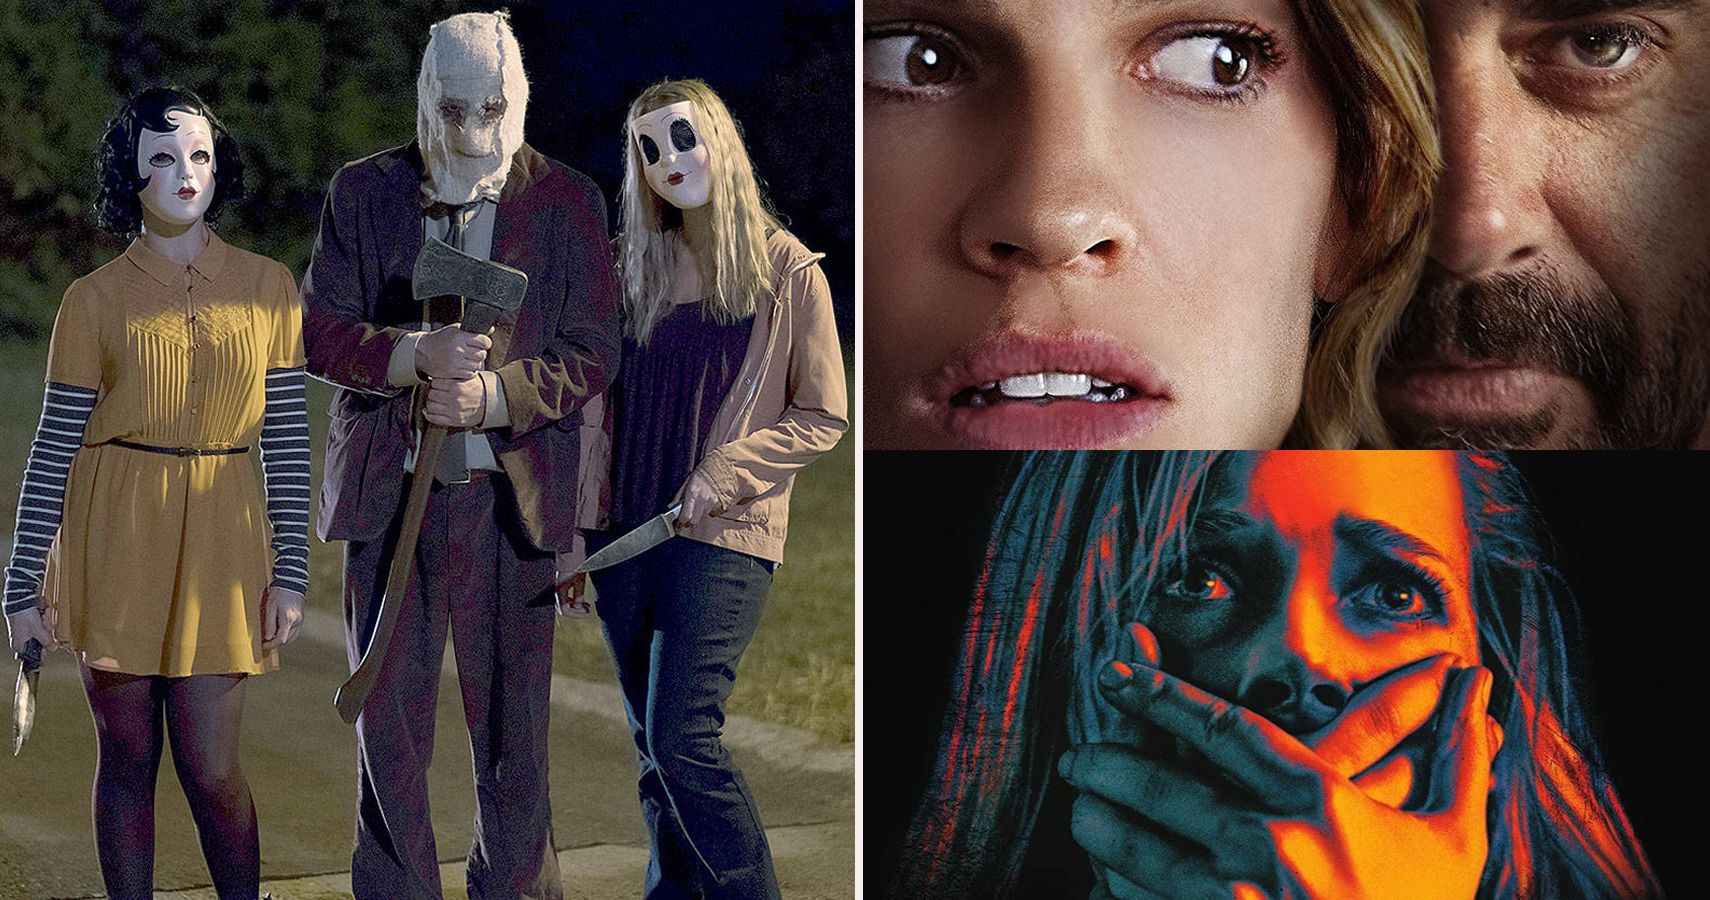 10 Creepiest Home Invasion Movies Ranked By IMDb